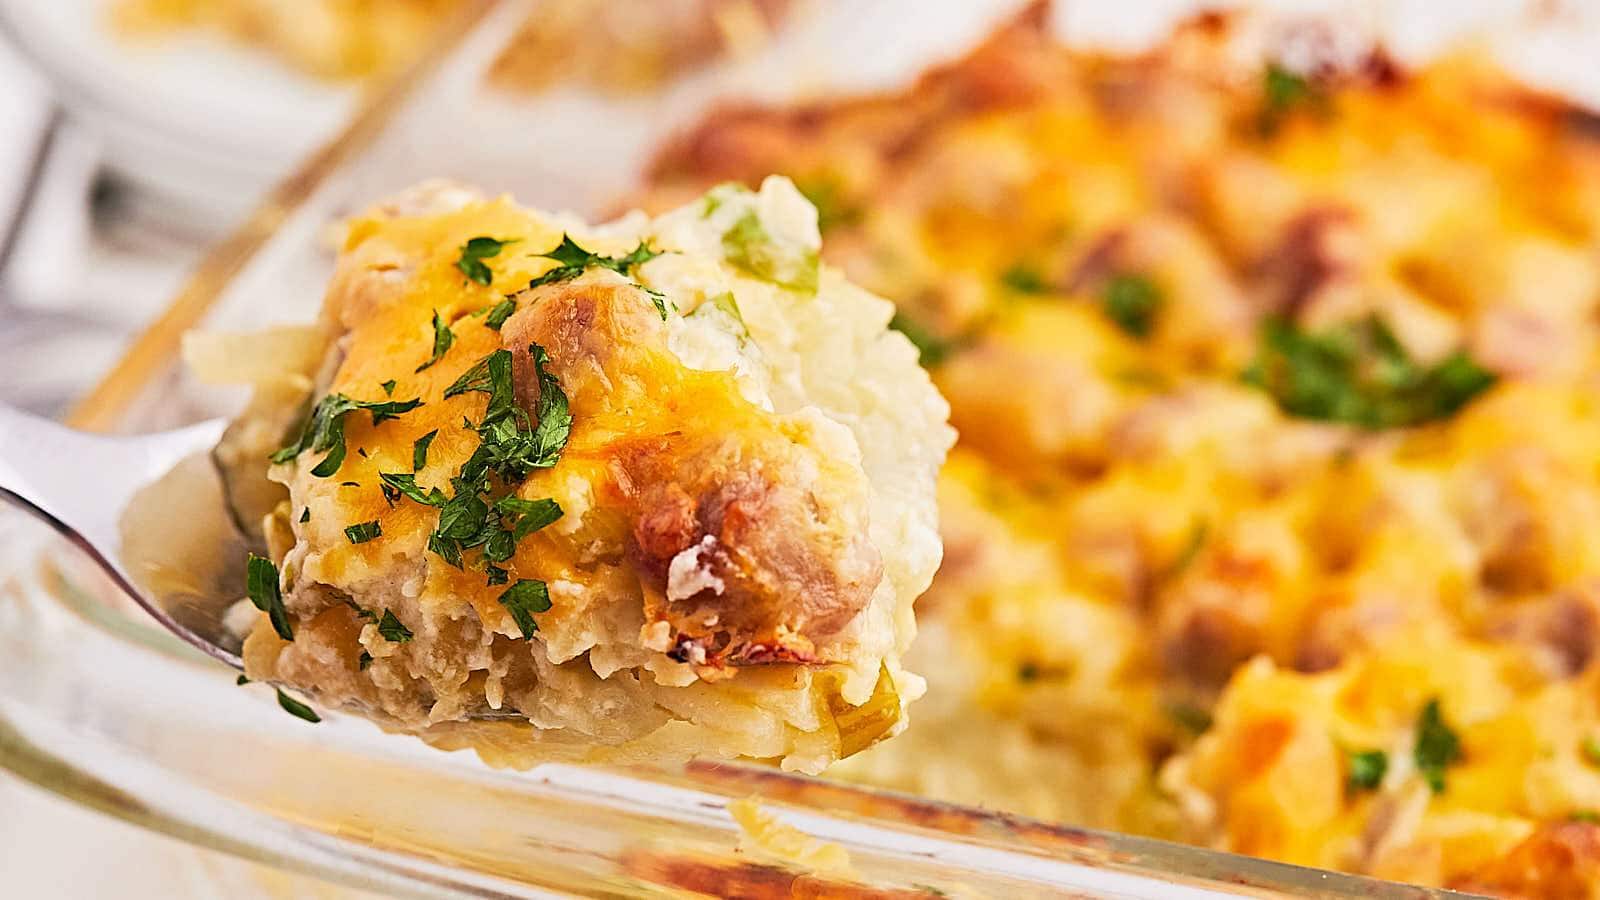 <p>This Sausage and Hash Brown Casserole is the ultimate crowd-pleaser, offering a mouthwatering mix of flavors. Think sausage, creamy cheese, and crispy hash browns—all baked to perfection.</p><p><strong>Get the Recipe: <a href="https://cheerfulcook.com/sausage-hashbrown-breakfast-casserole/" rel="noreferrer noopener">Sausage And Hash Brown Casserole</a></strong></p>